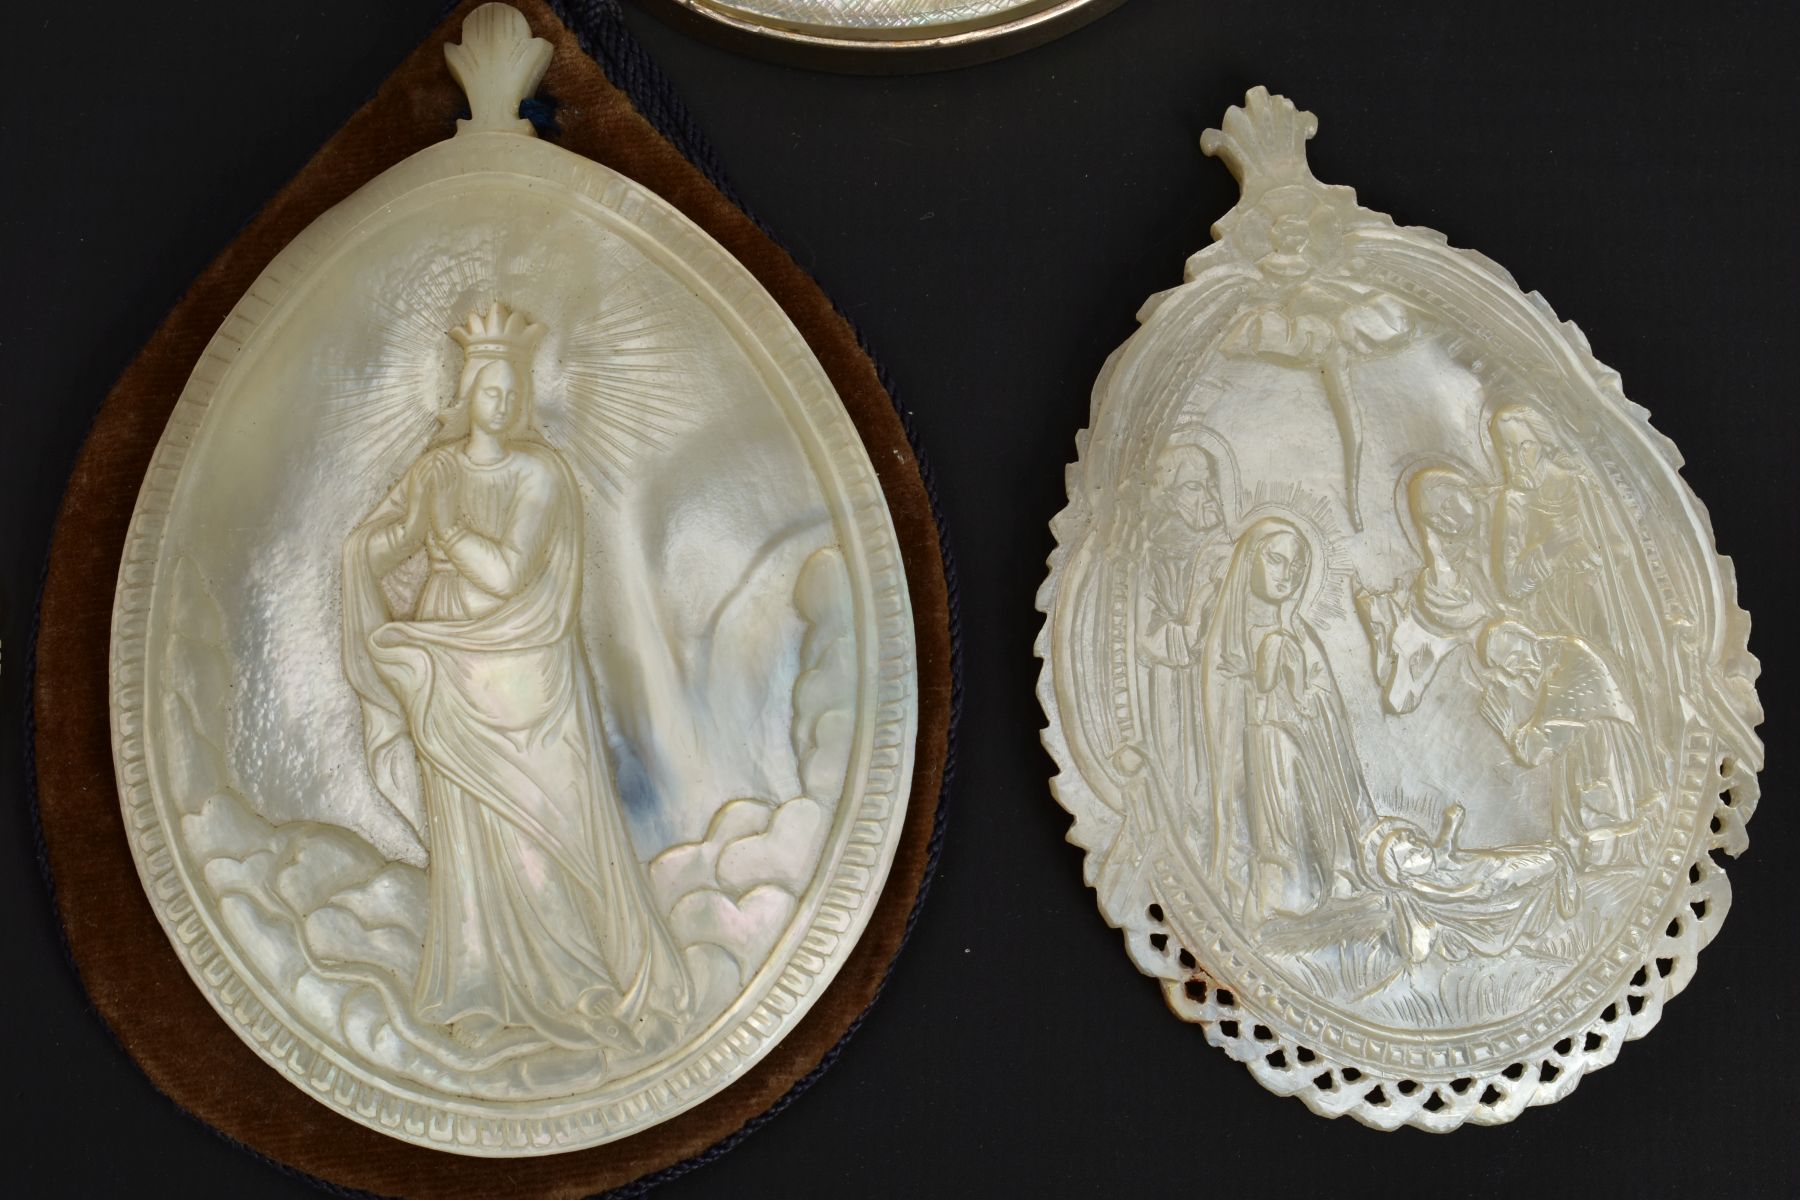 SEVEN MOTHER OF PEARL SHELL CARVINGS OF BIBLICAL SCENES, including the Nativity, the crucifixion and - Image 17 of 17